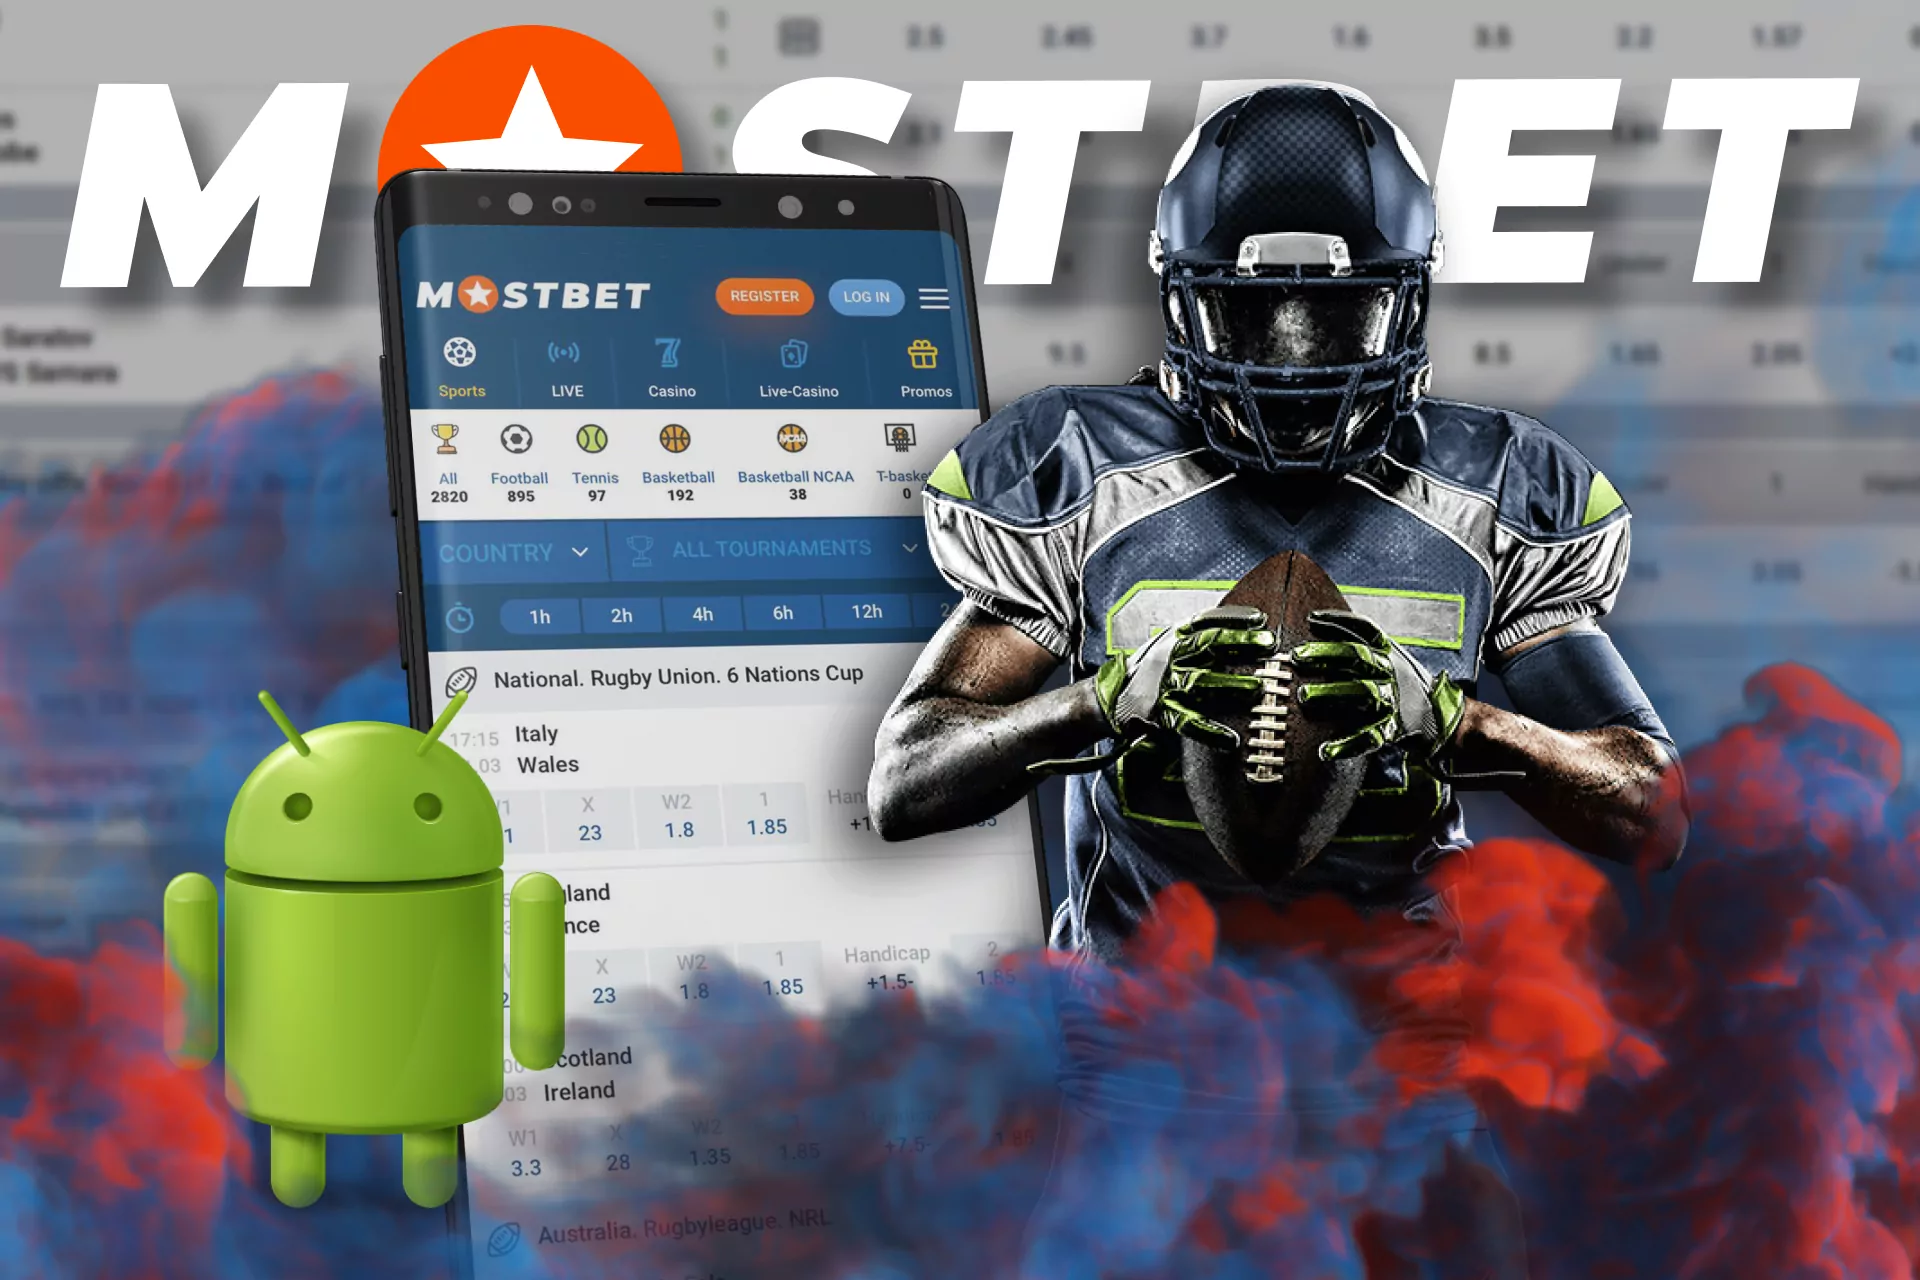 Bet on rugby on your Android phone with Mostbet.